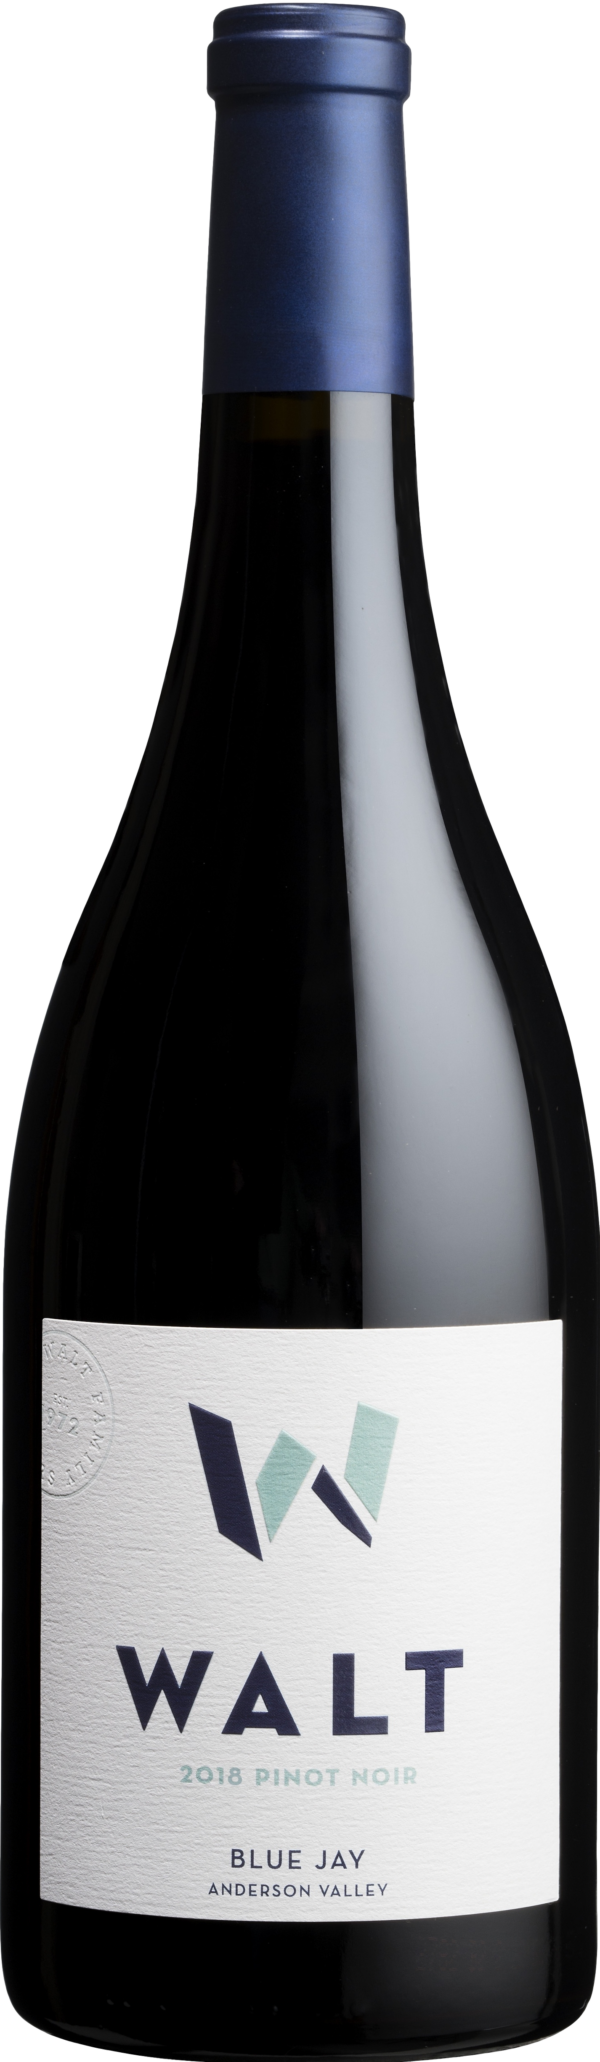 Product image of Walt Blue Jay Pinot Noir 2018 from 8wines